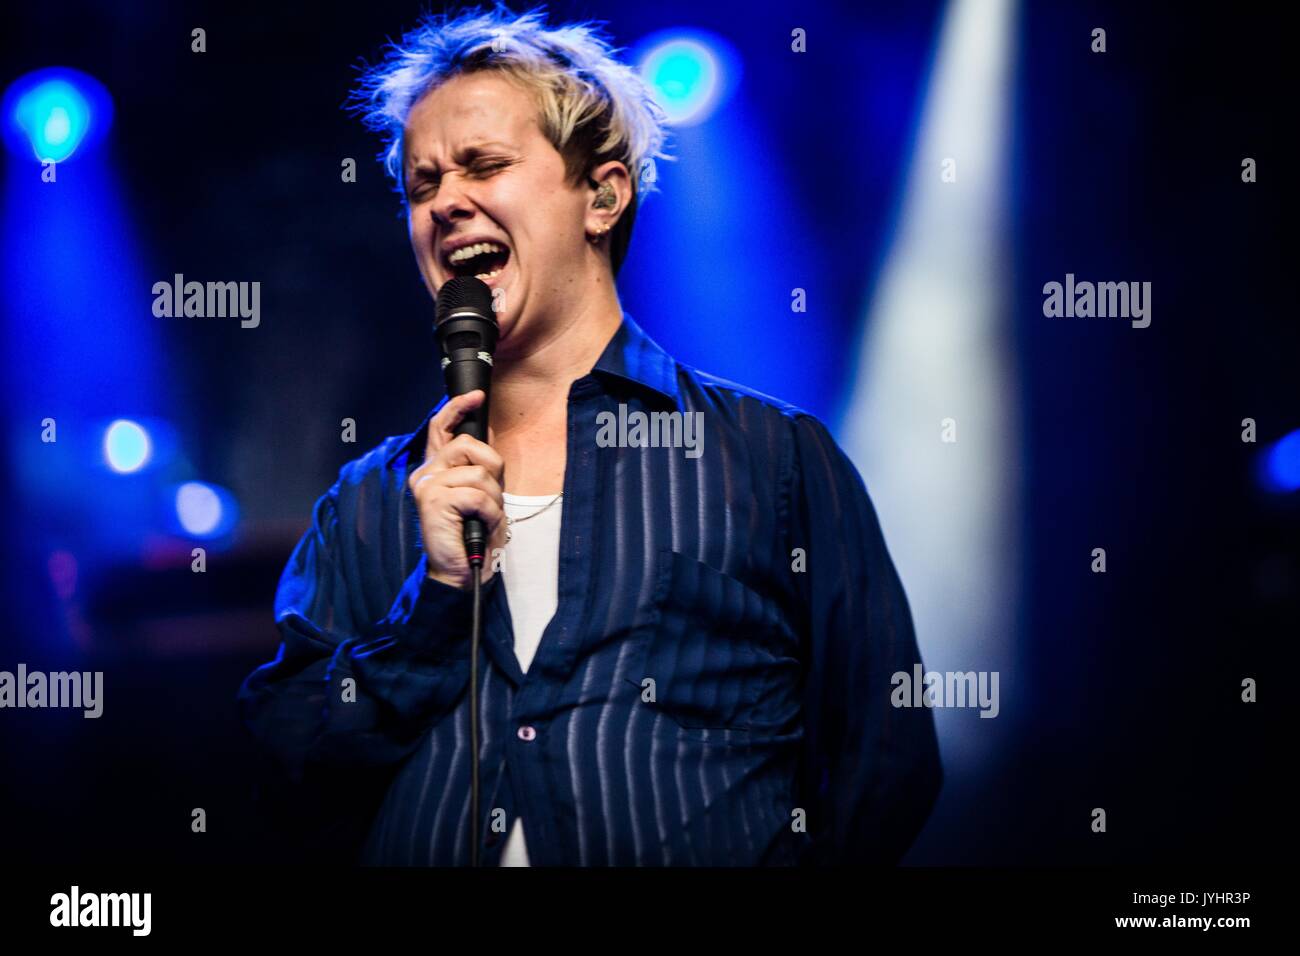 Conor Mason of the english alternative rock band Nothing But Thieves pictured on stage as they perform live at Lowlands Festival 2017 in Biddinghuizen Netherlands (Photo by Roberto Finizio / Pacific Press) Stock Photo